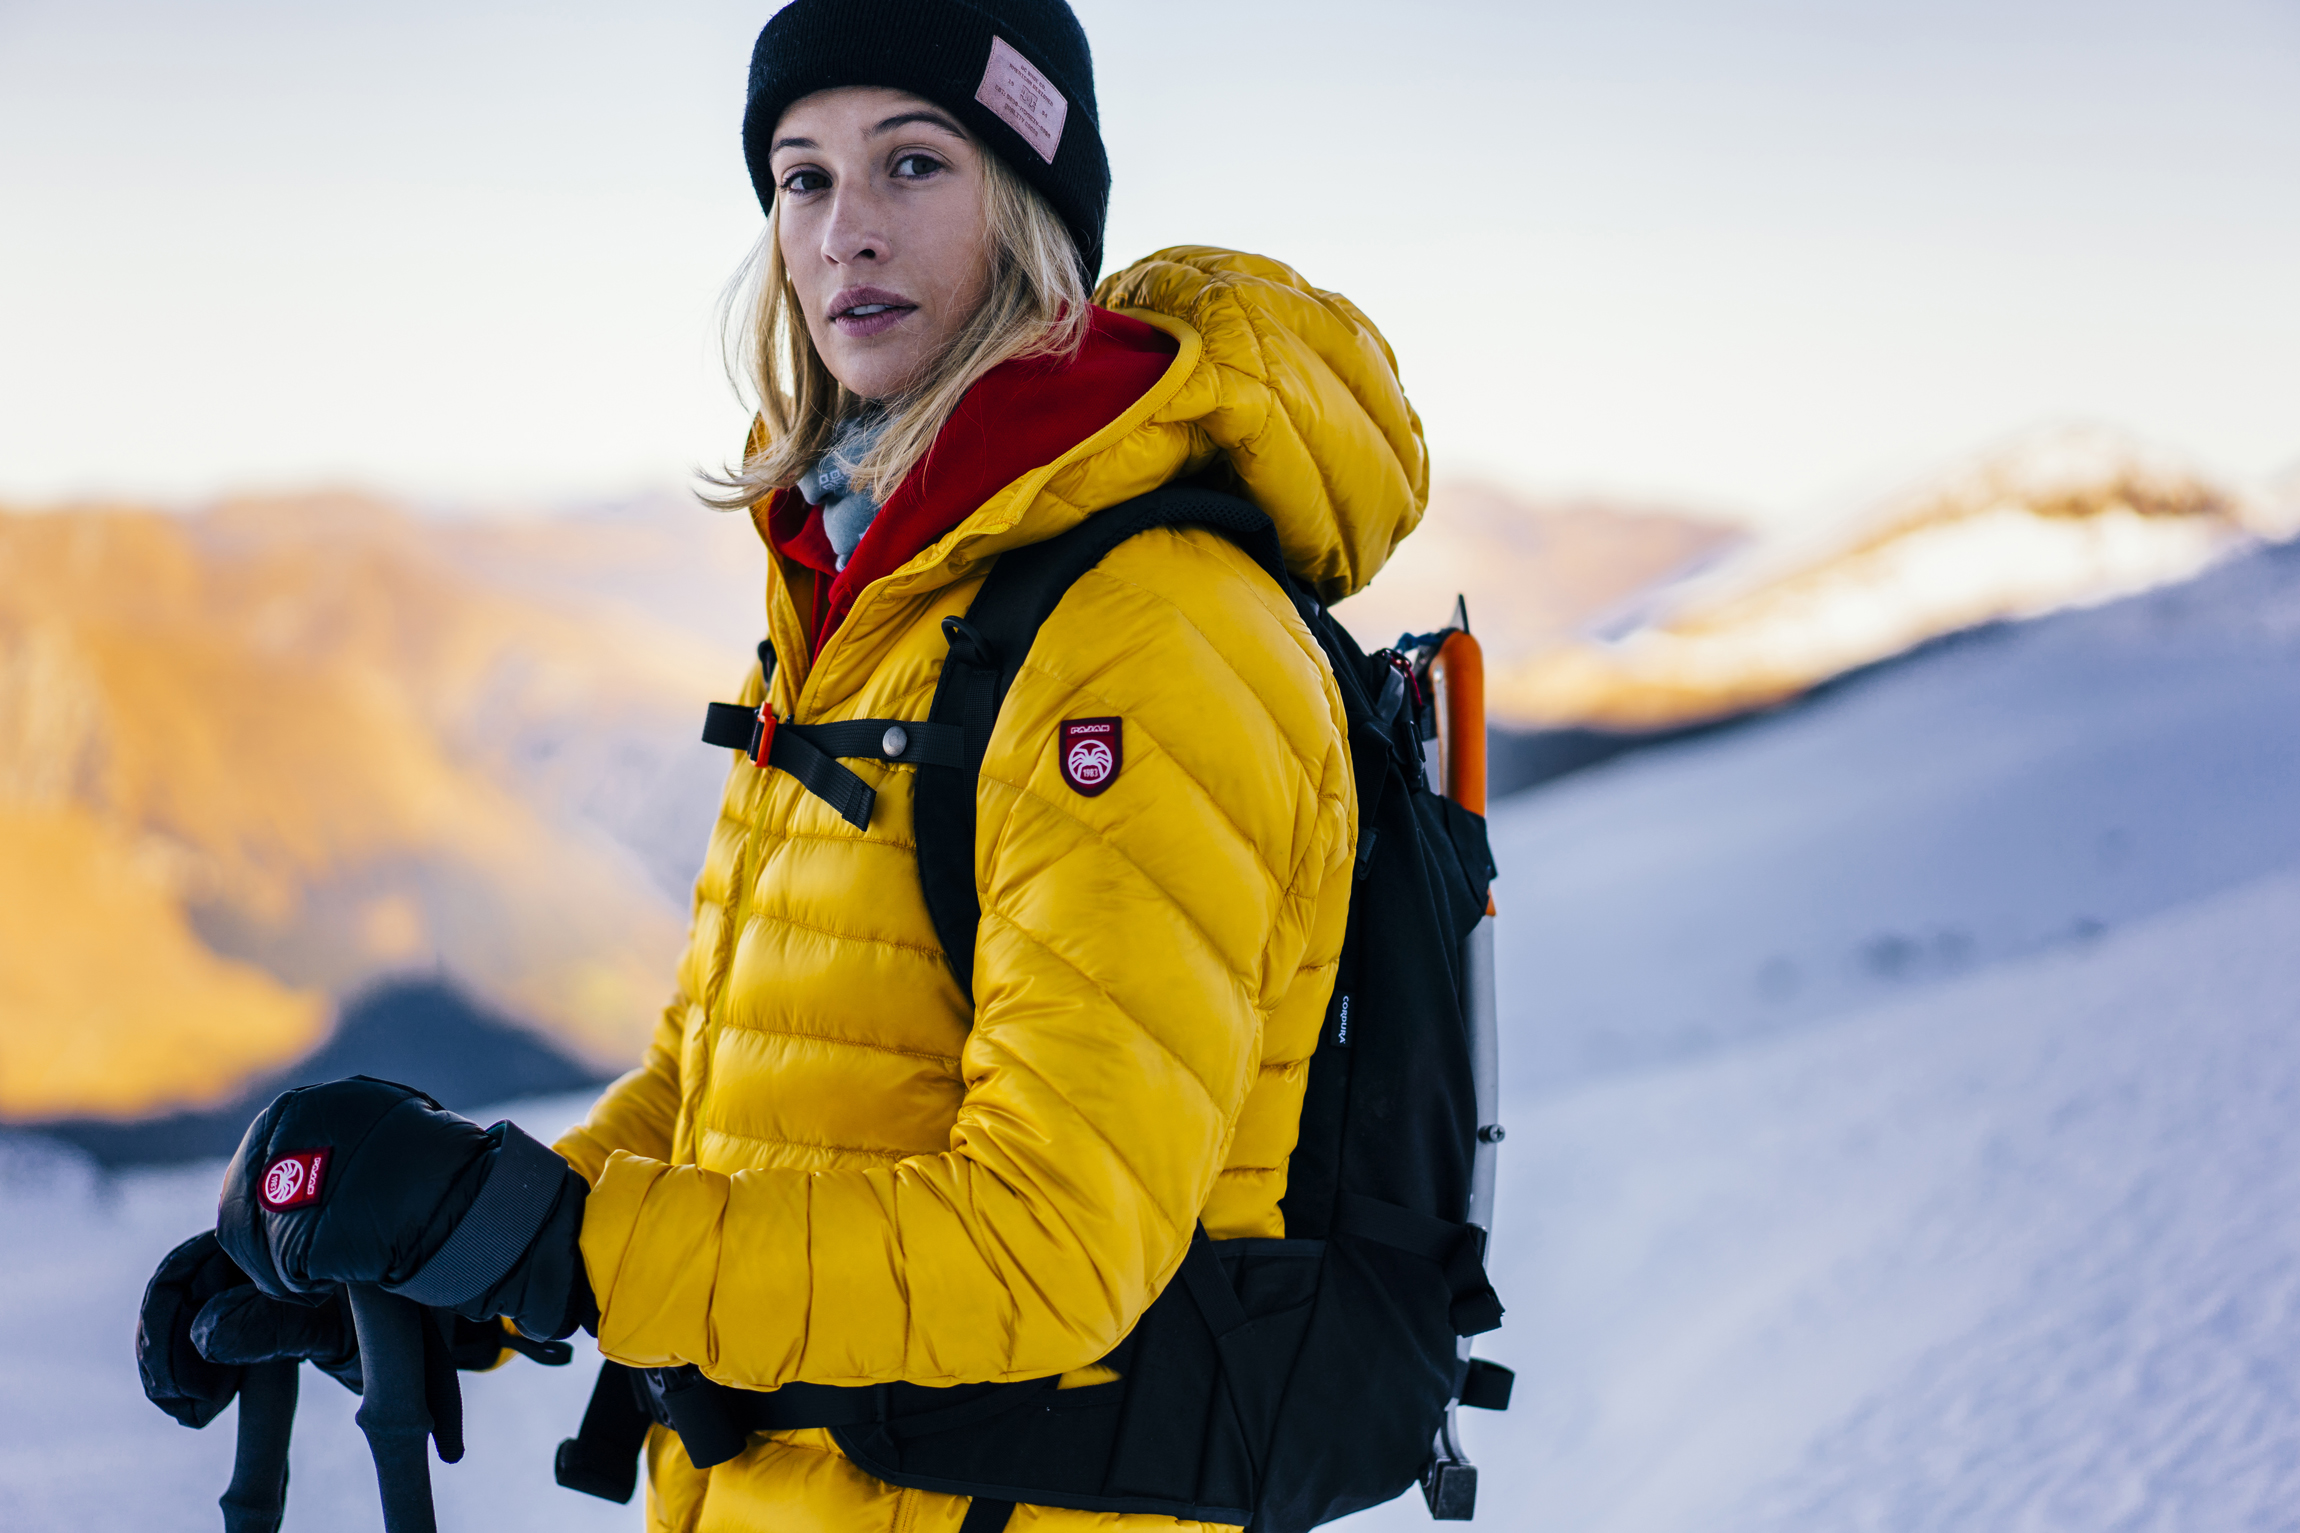 THE EXTREME BACKPACK – DESIGNED WITH WINTER IN MIND